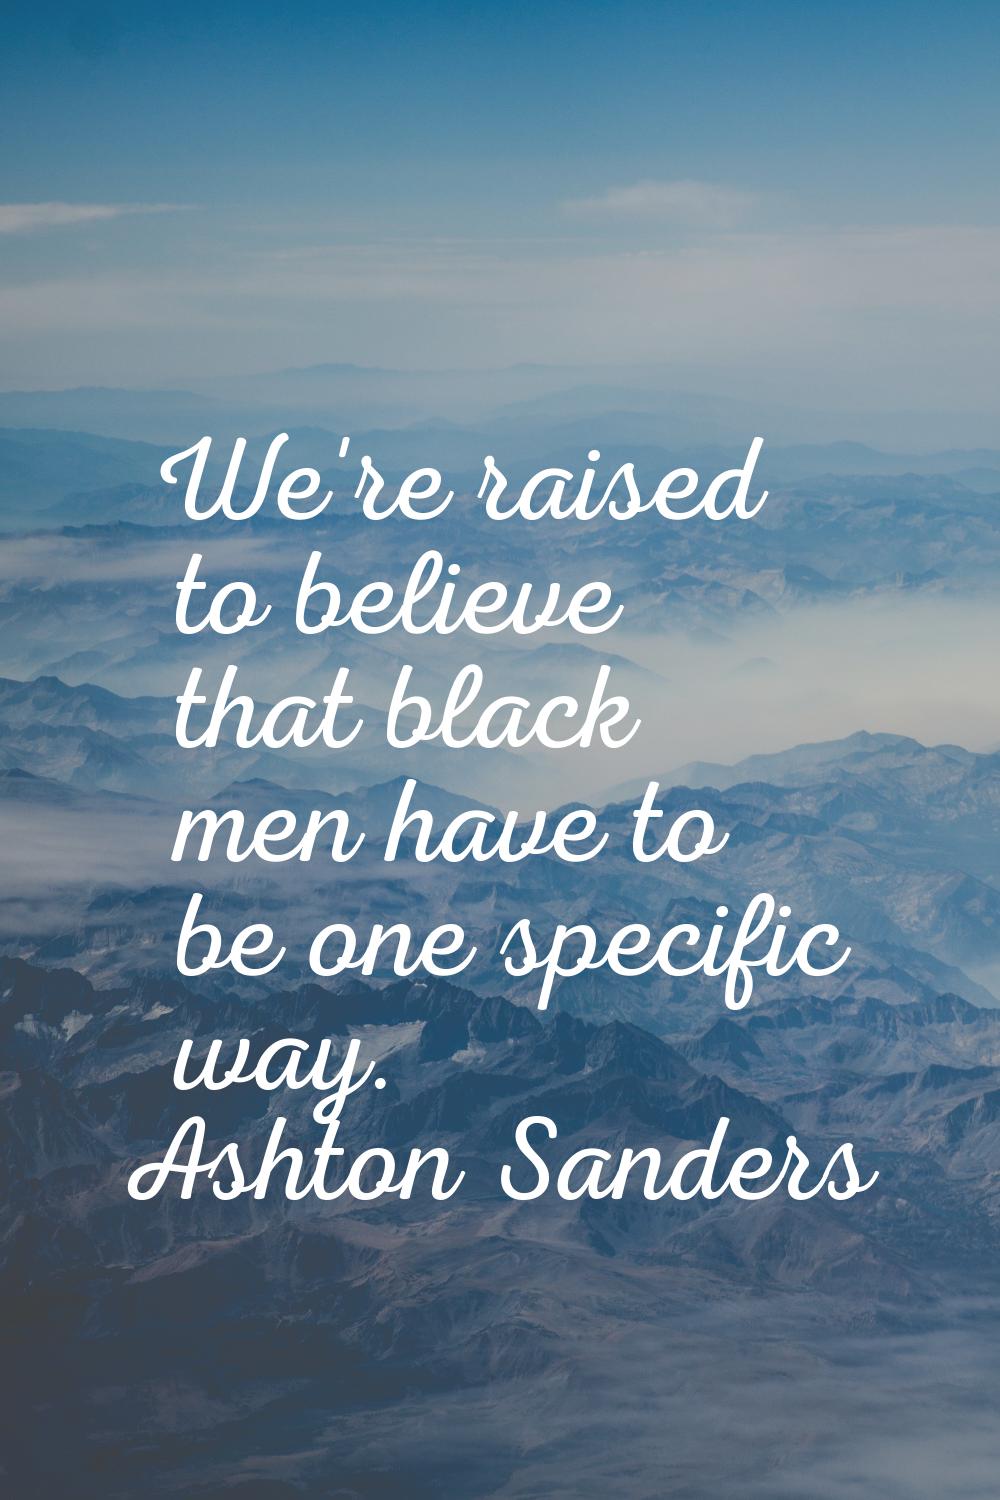 We're raised to believe that black men have to be one specific way.